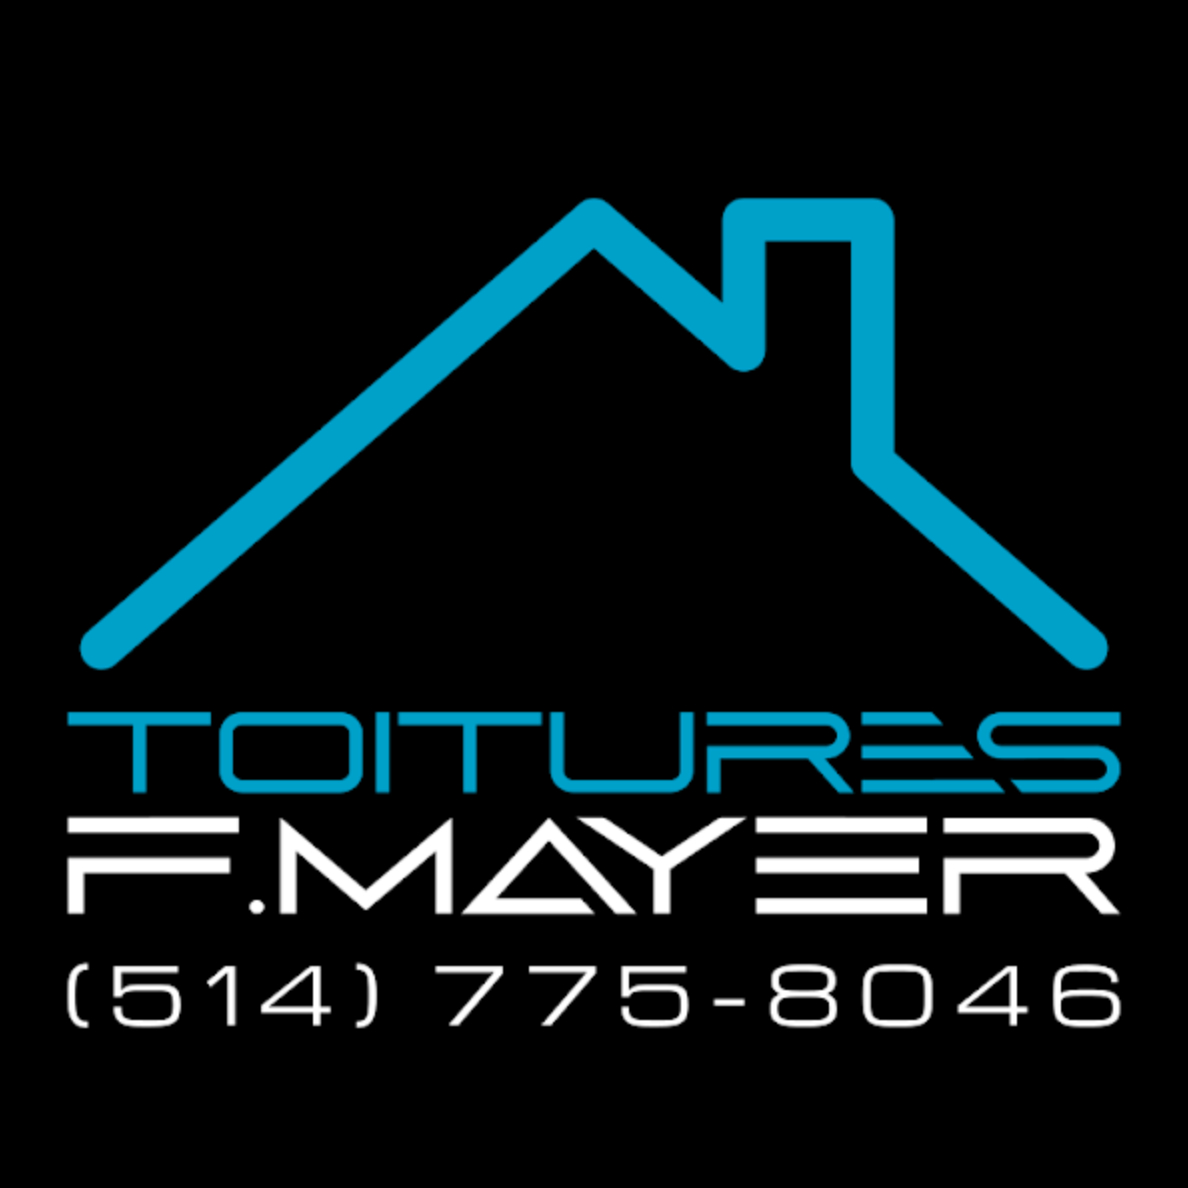 Toitures F. Mayer - Roofers